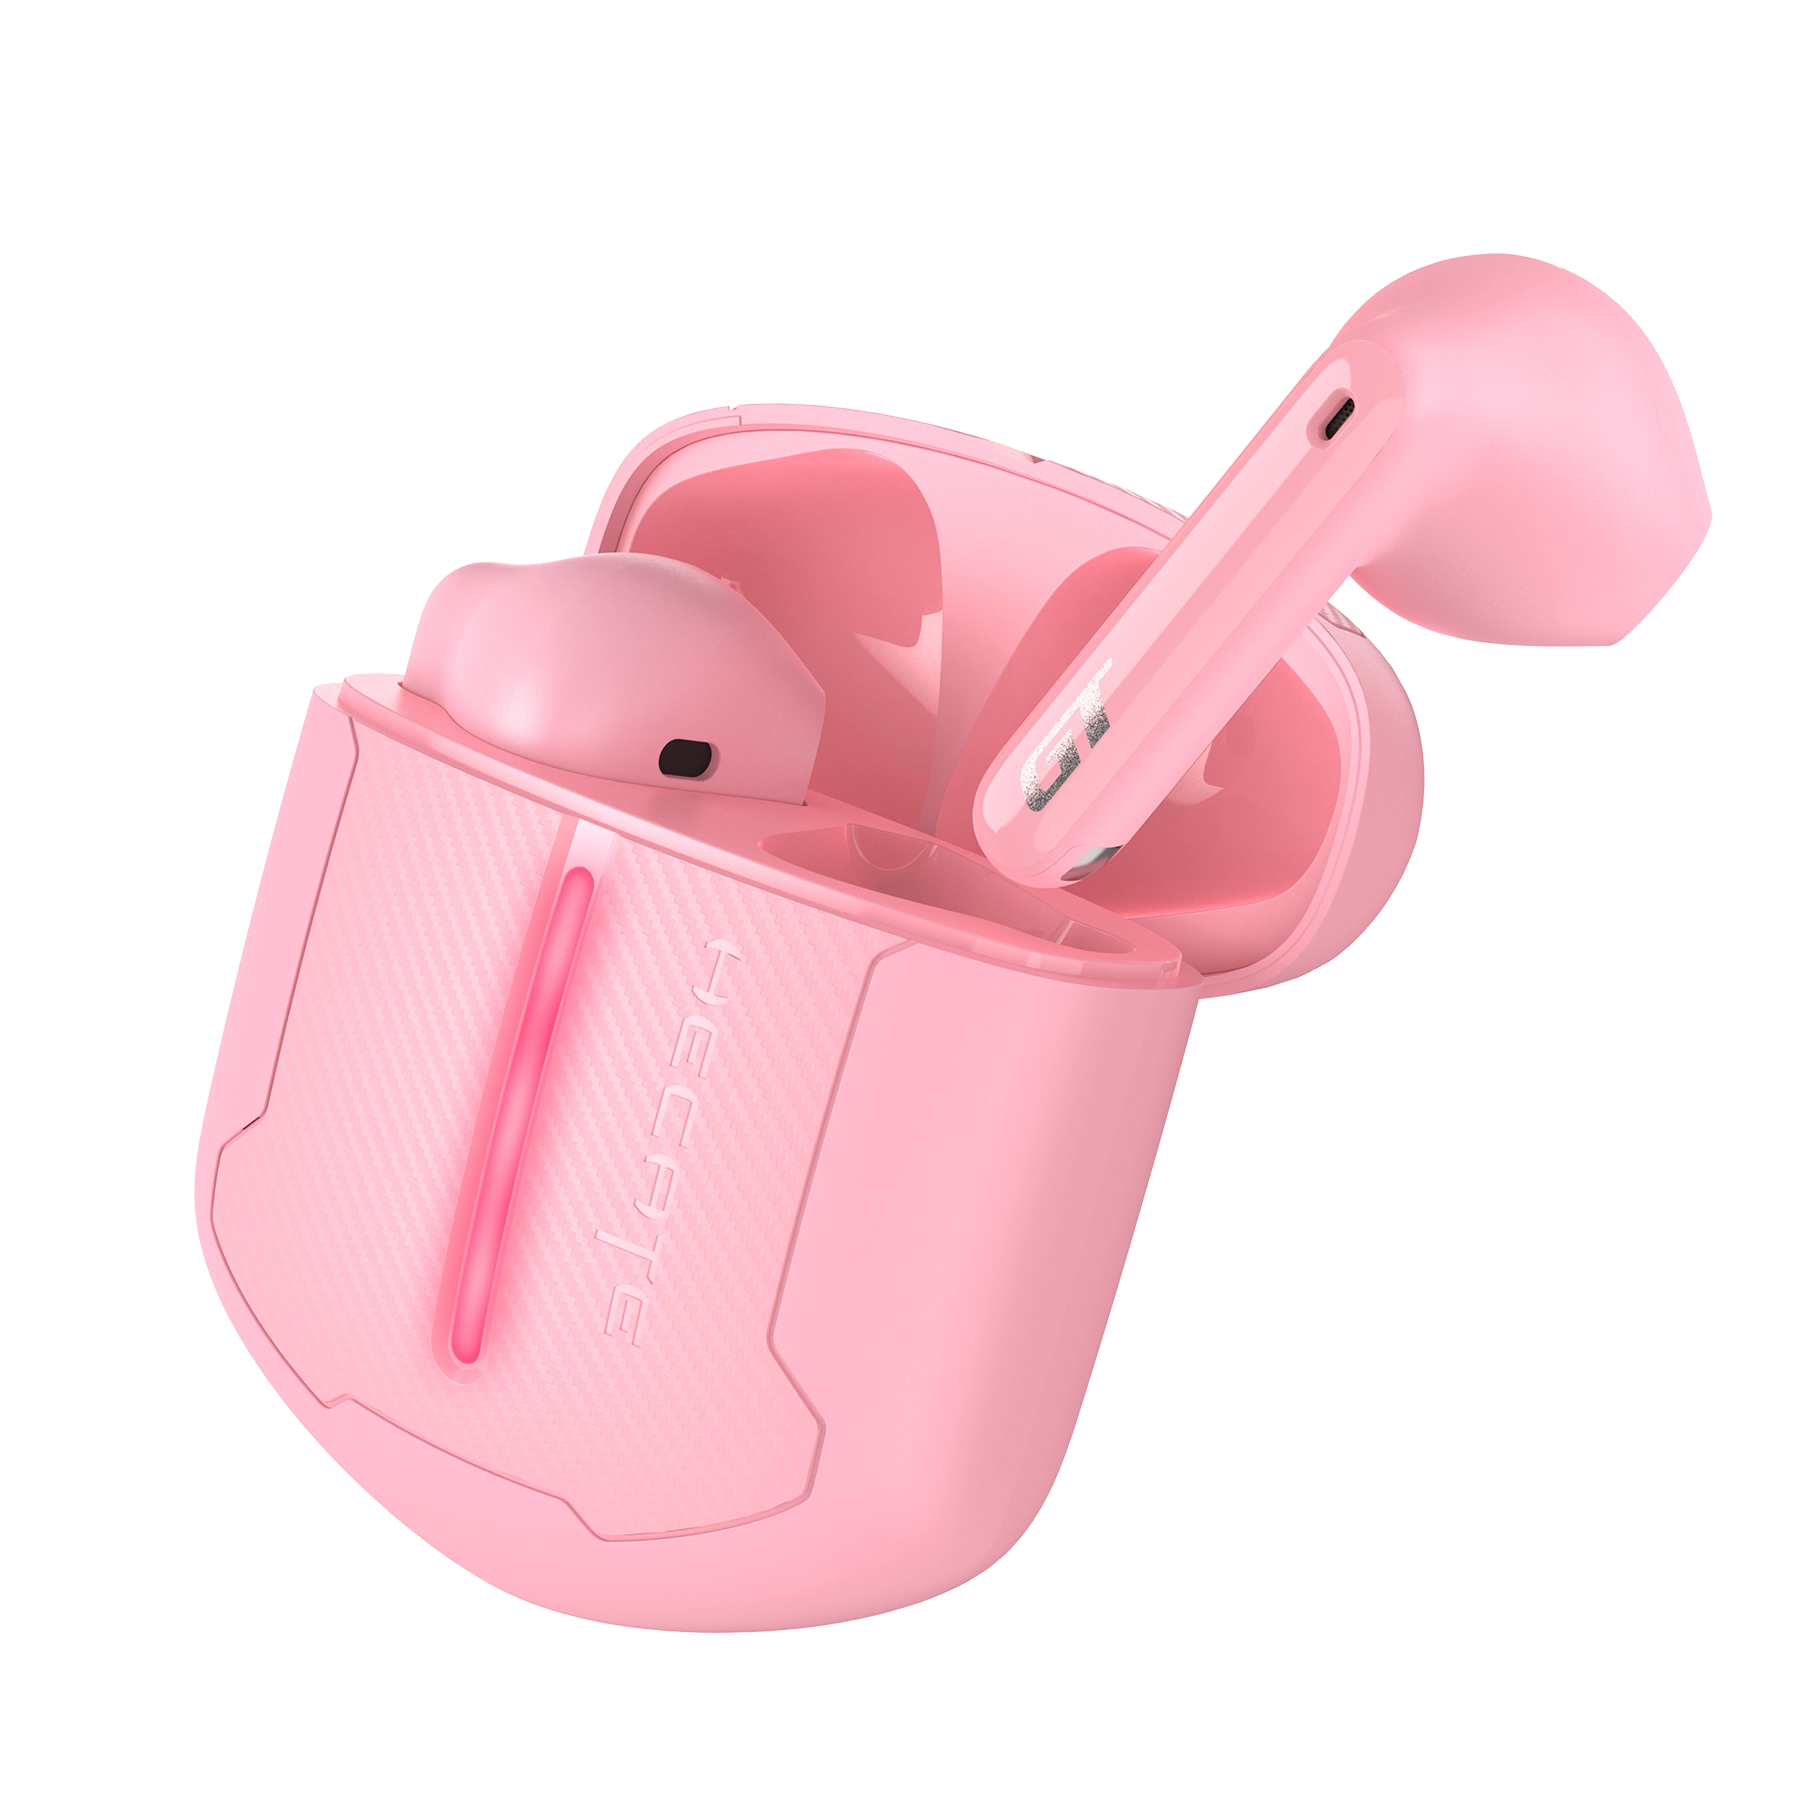 GT2 wireless earbuds Product Pictures Pink_4